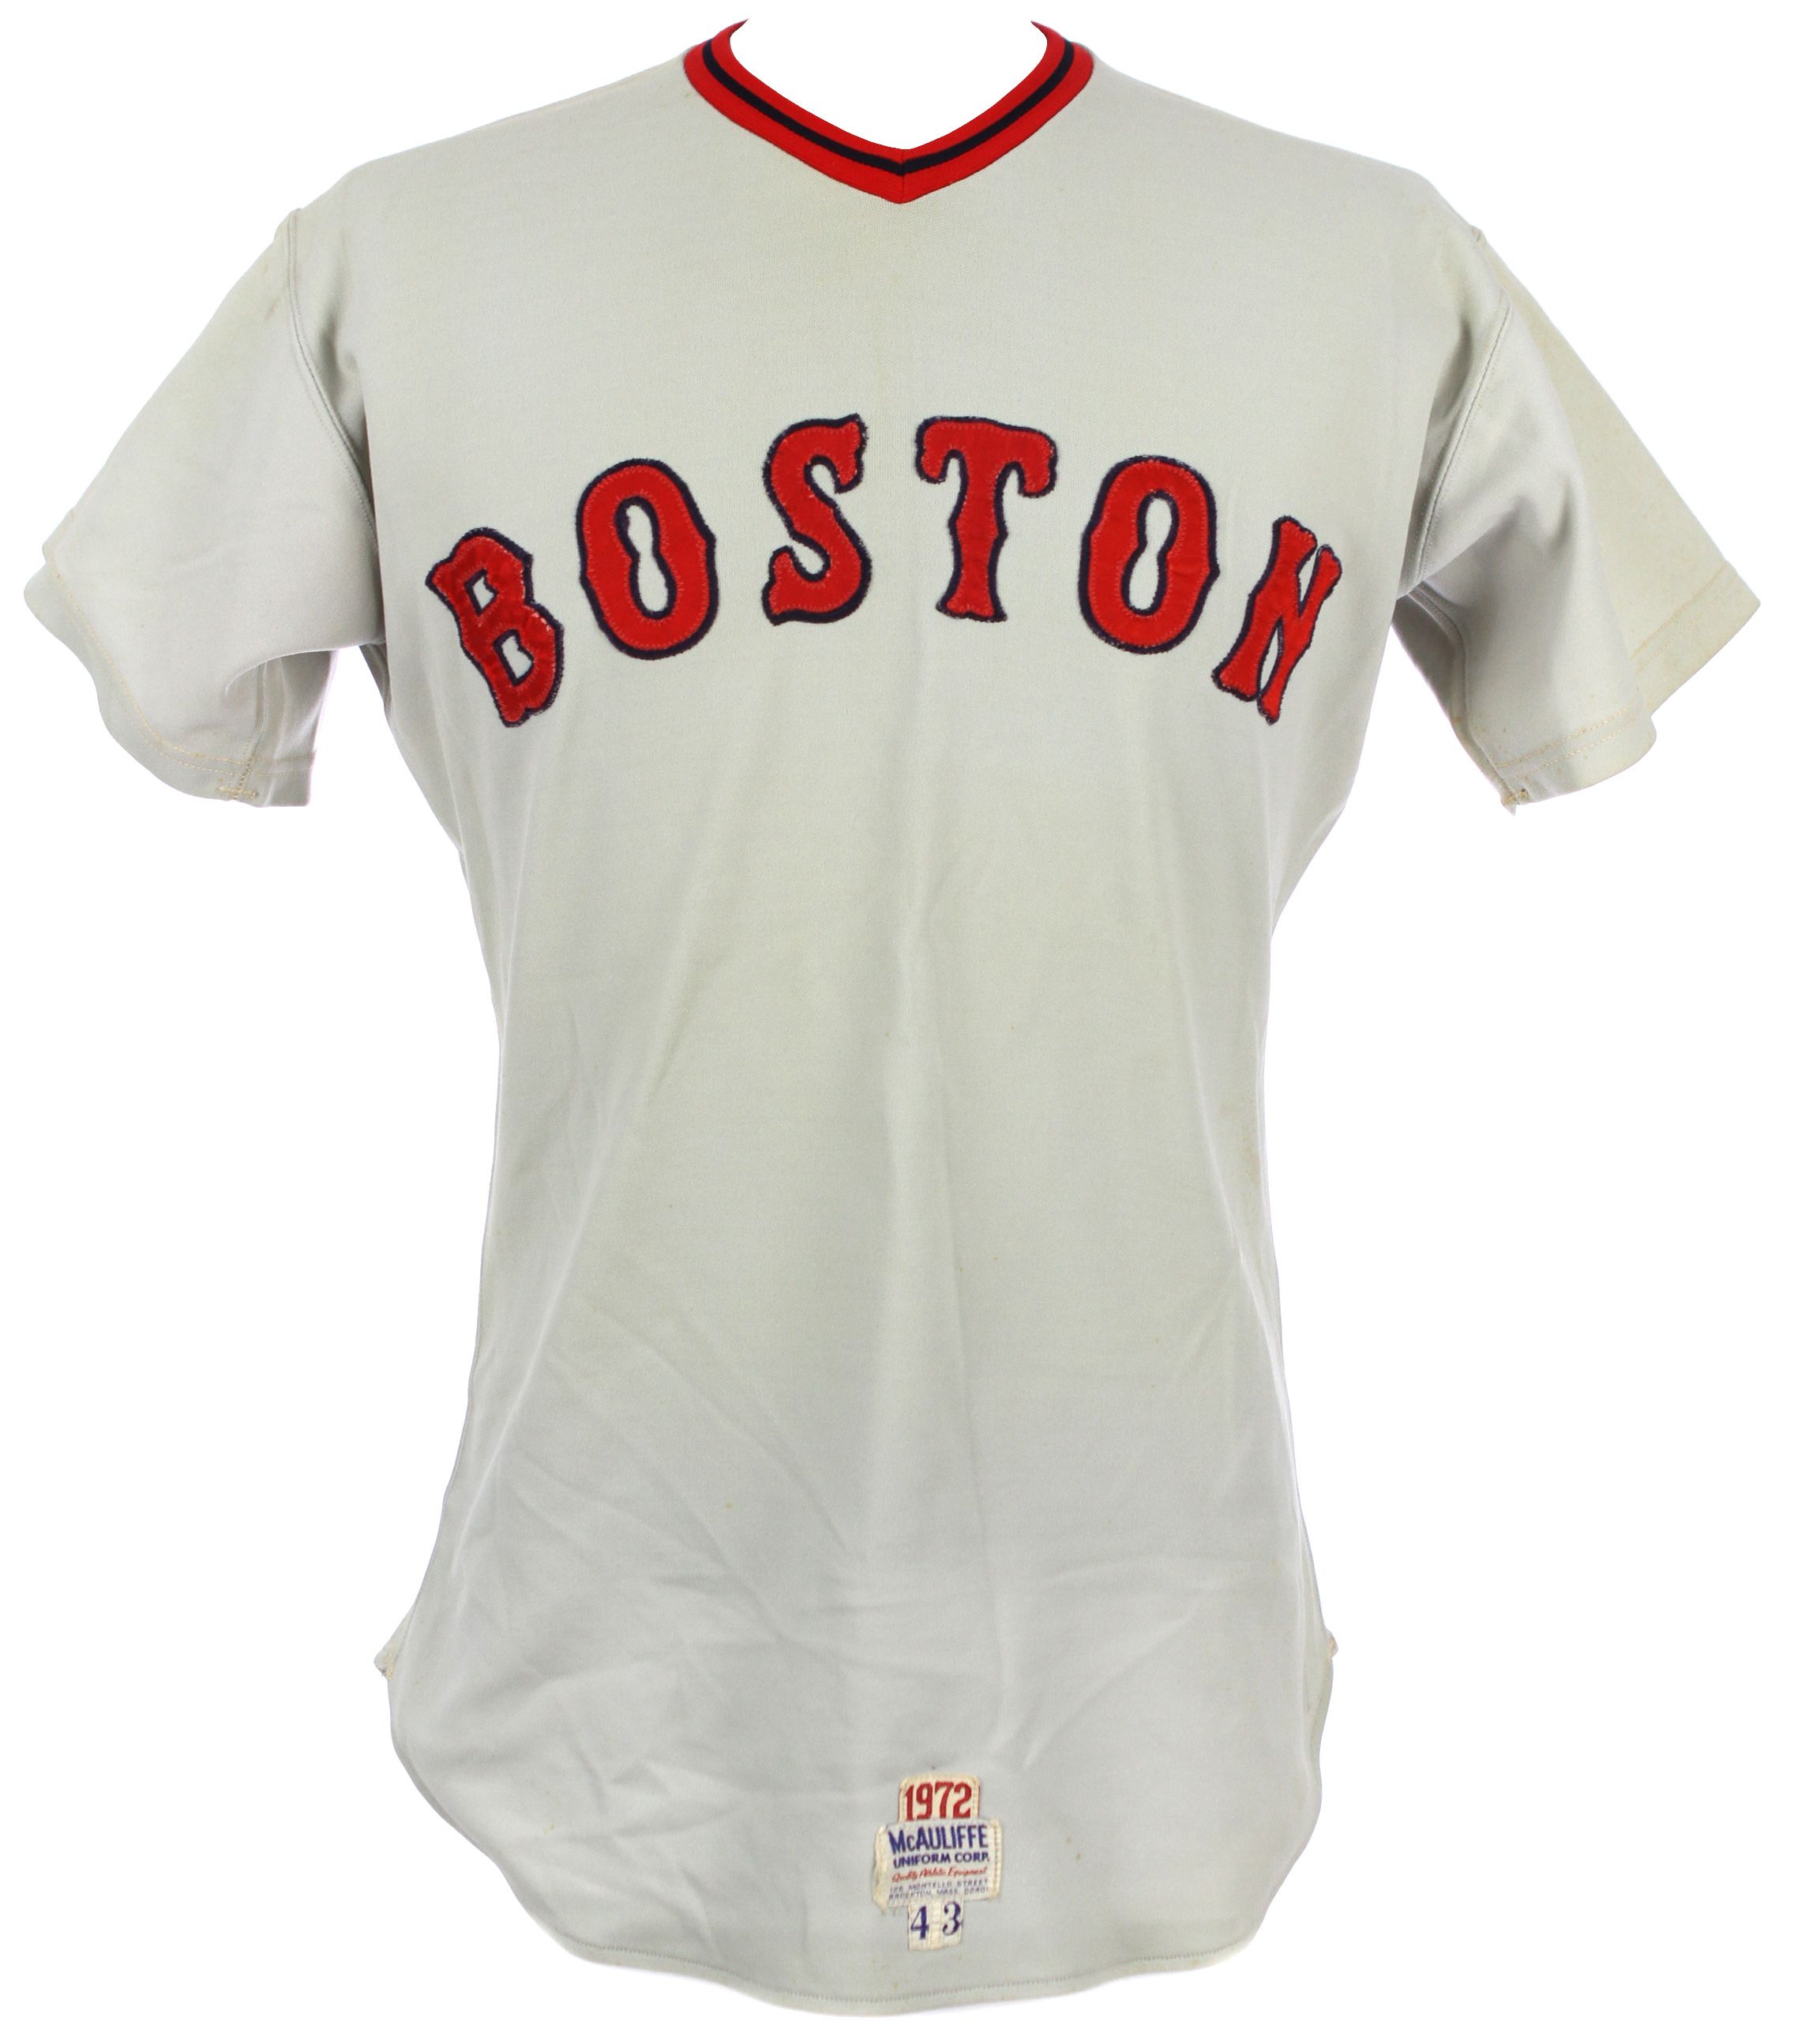 Carlton Fisk Signed Red Sox 1975 Game-Used Jersey (JSA LOA & Mears